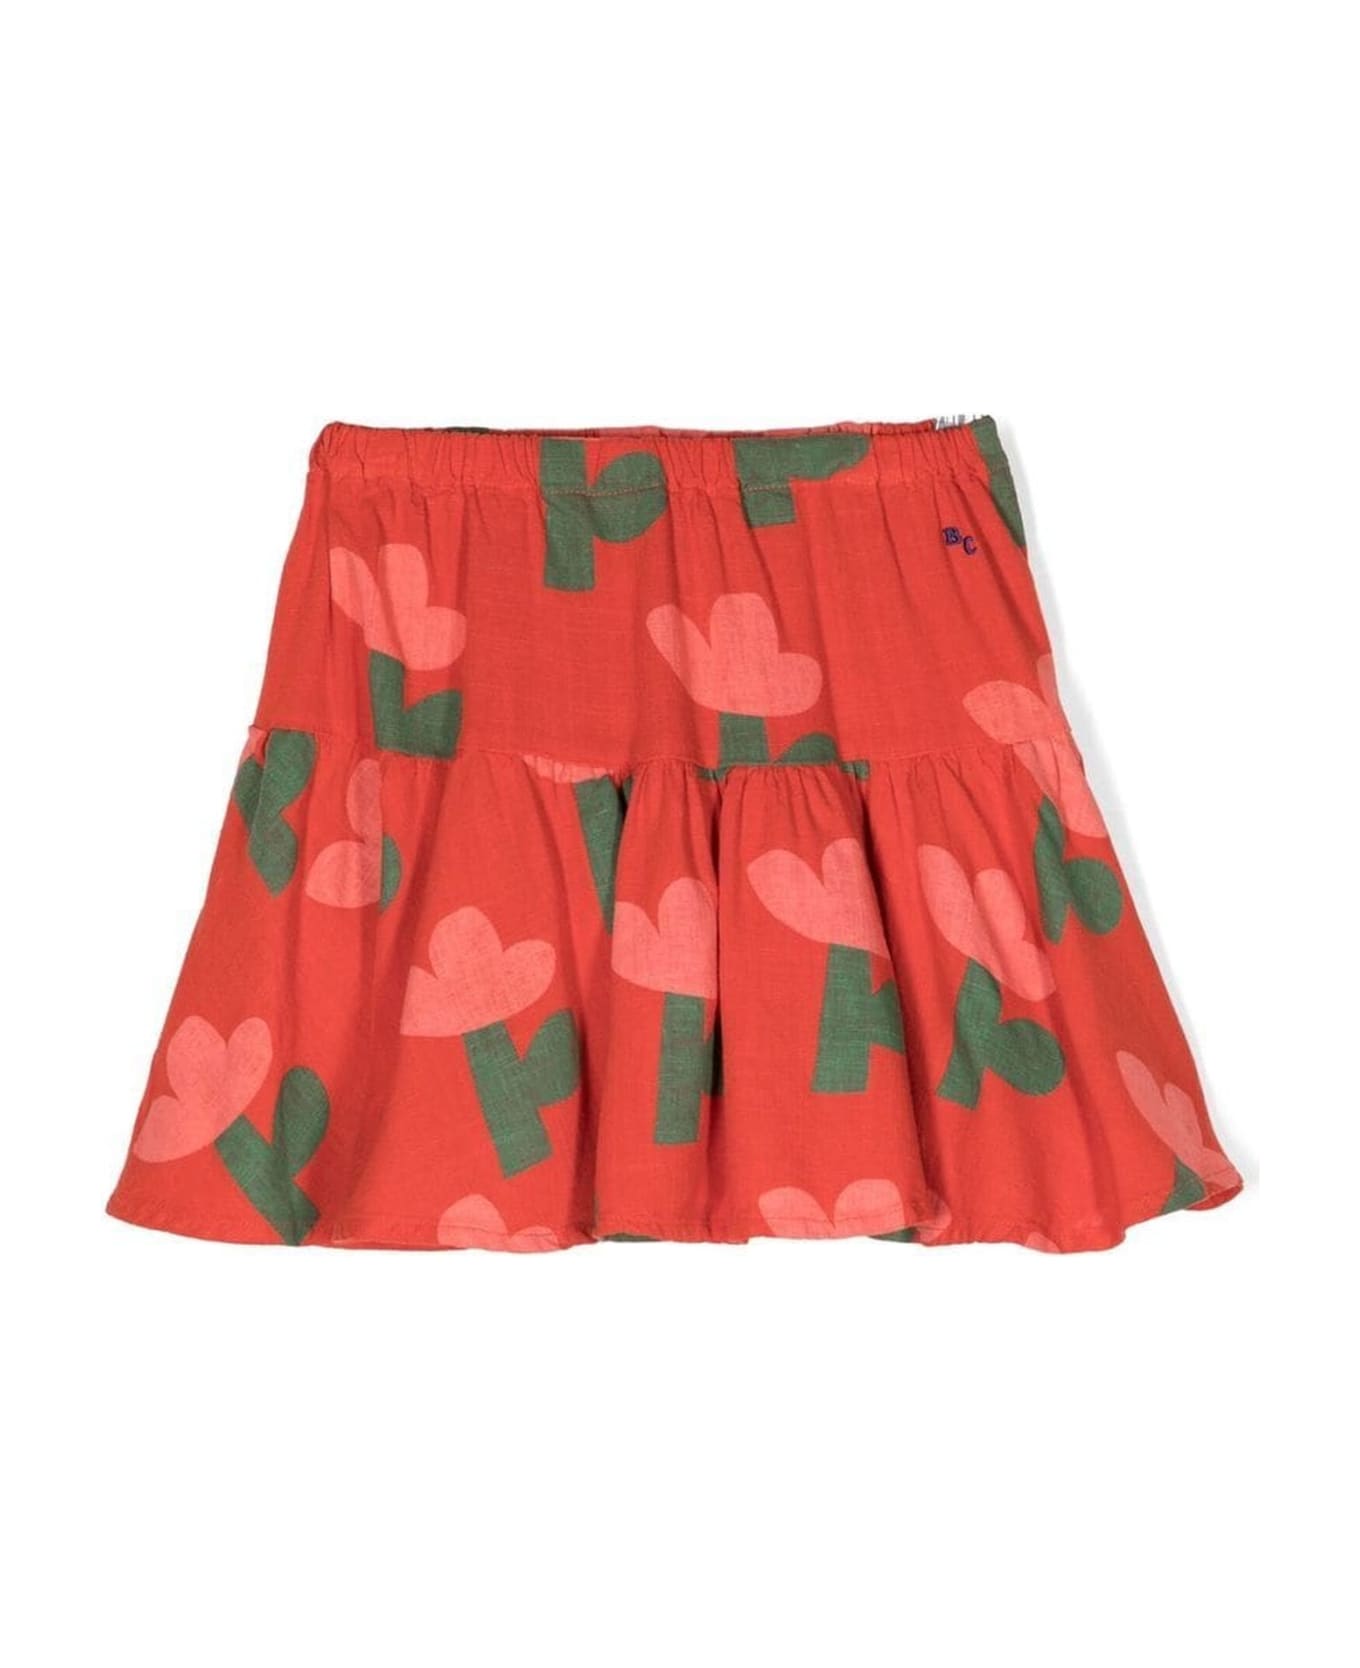 Bobo Choses Skirts Red - Red